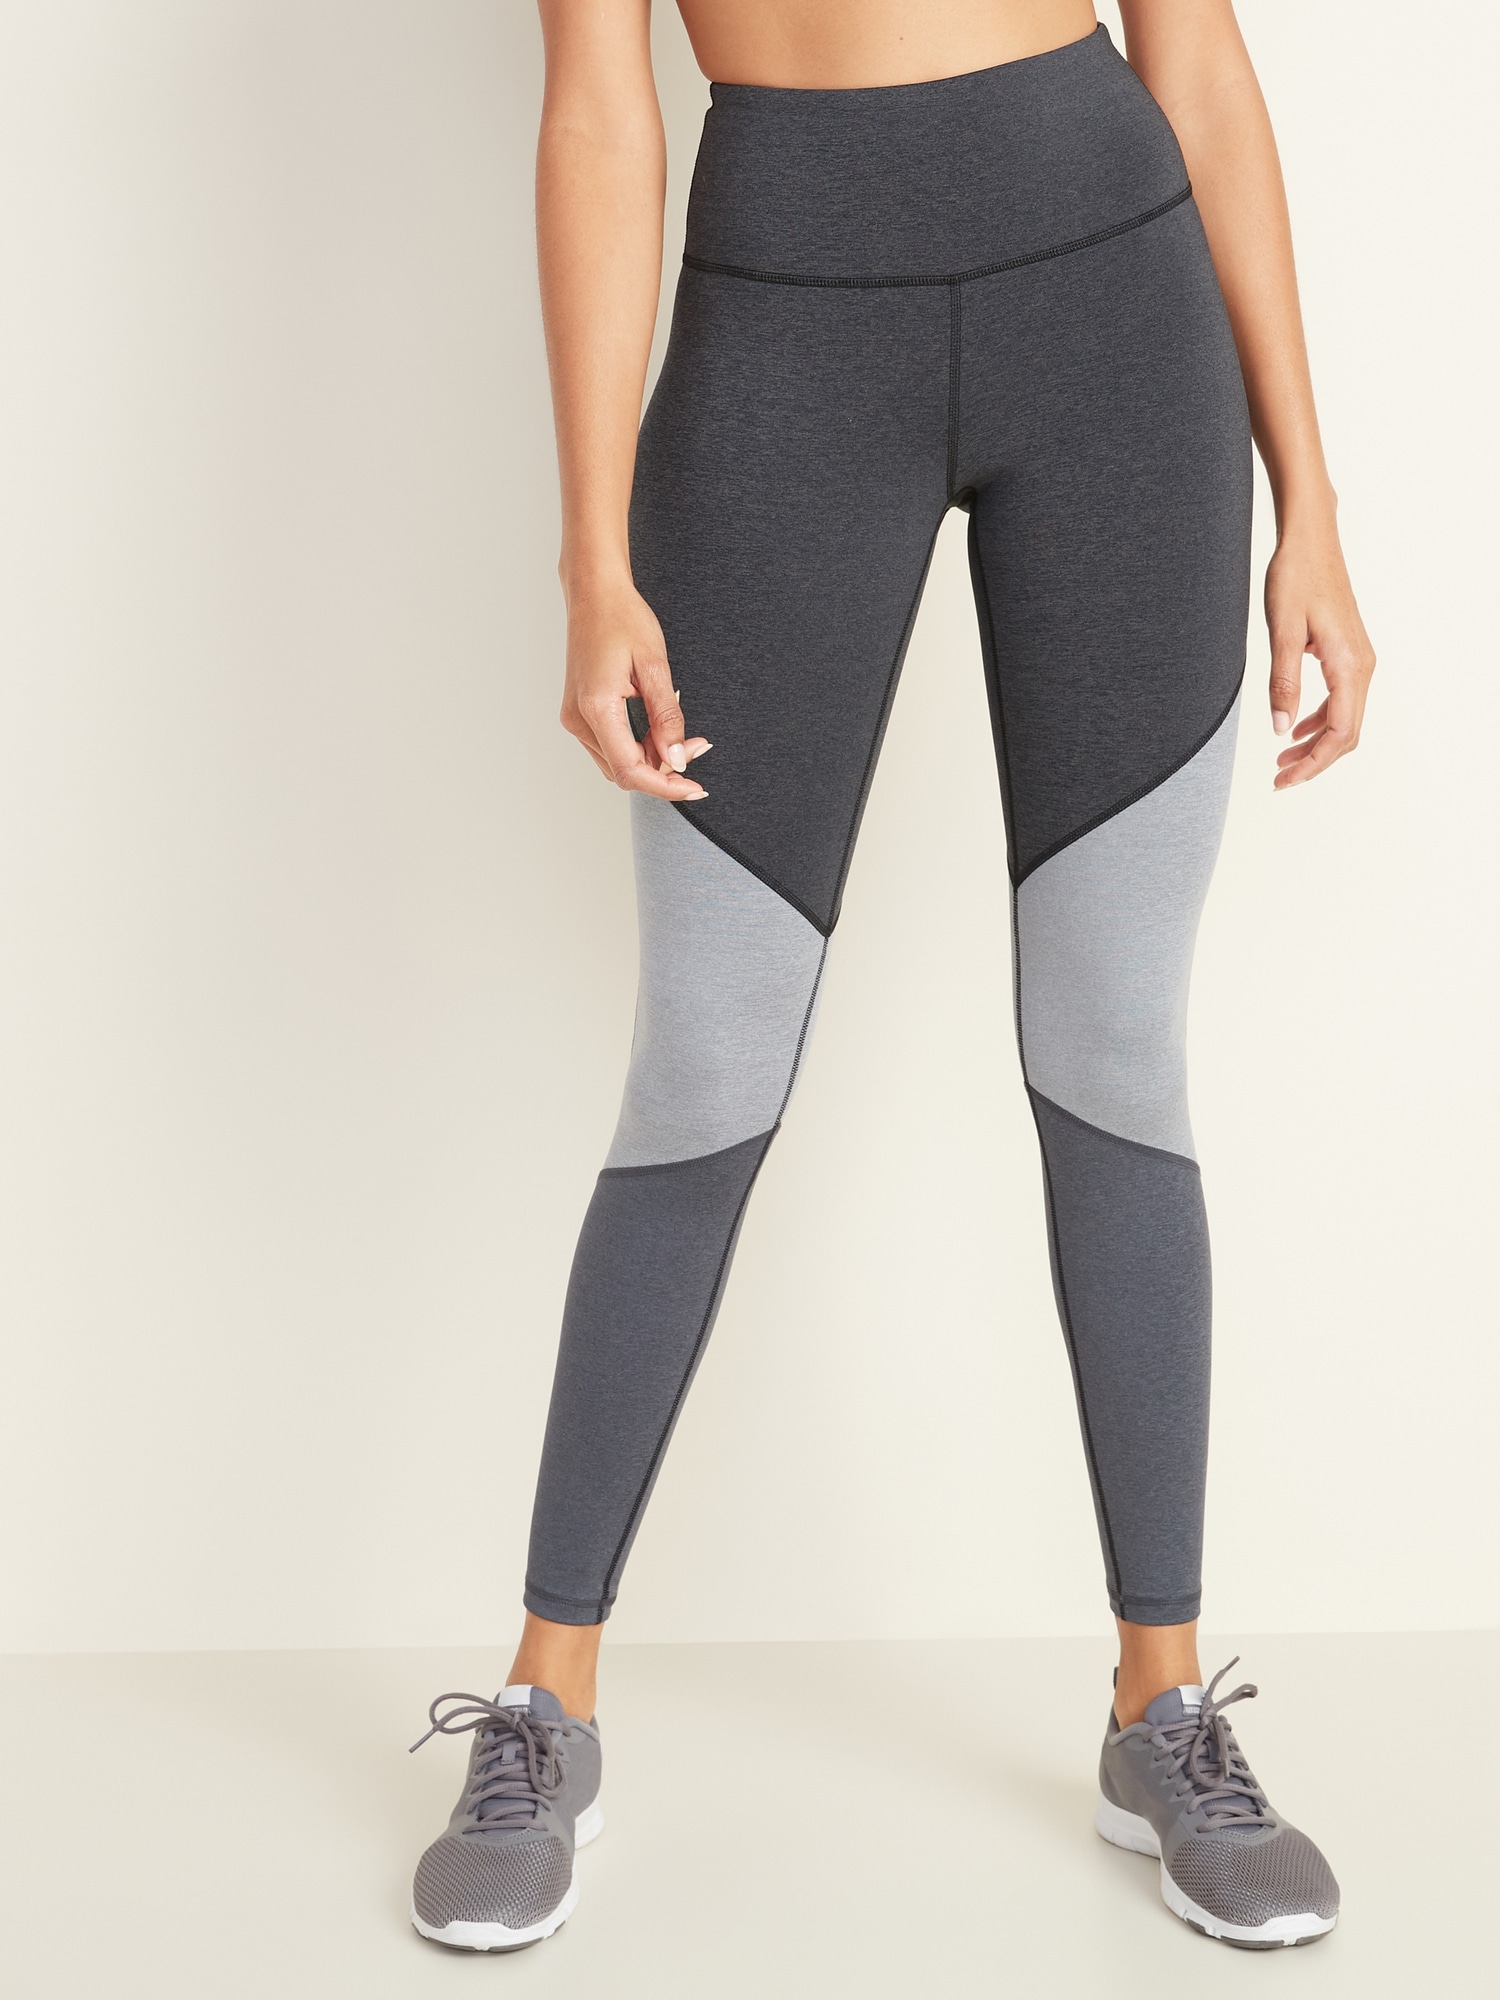 High-Waisted Elevate Color-Blocked Compression Leggings for Women